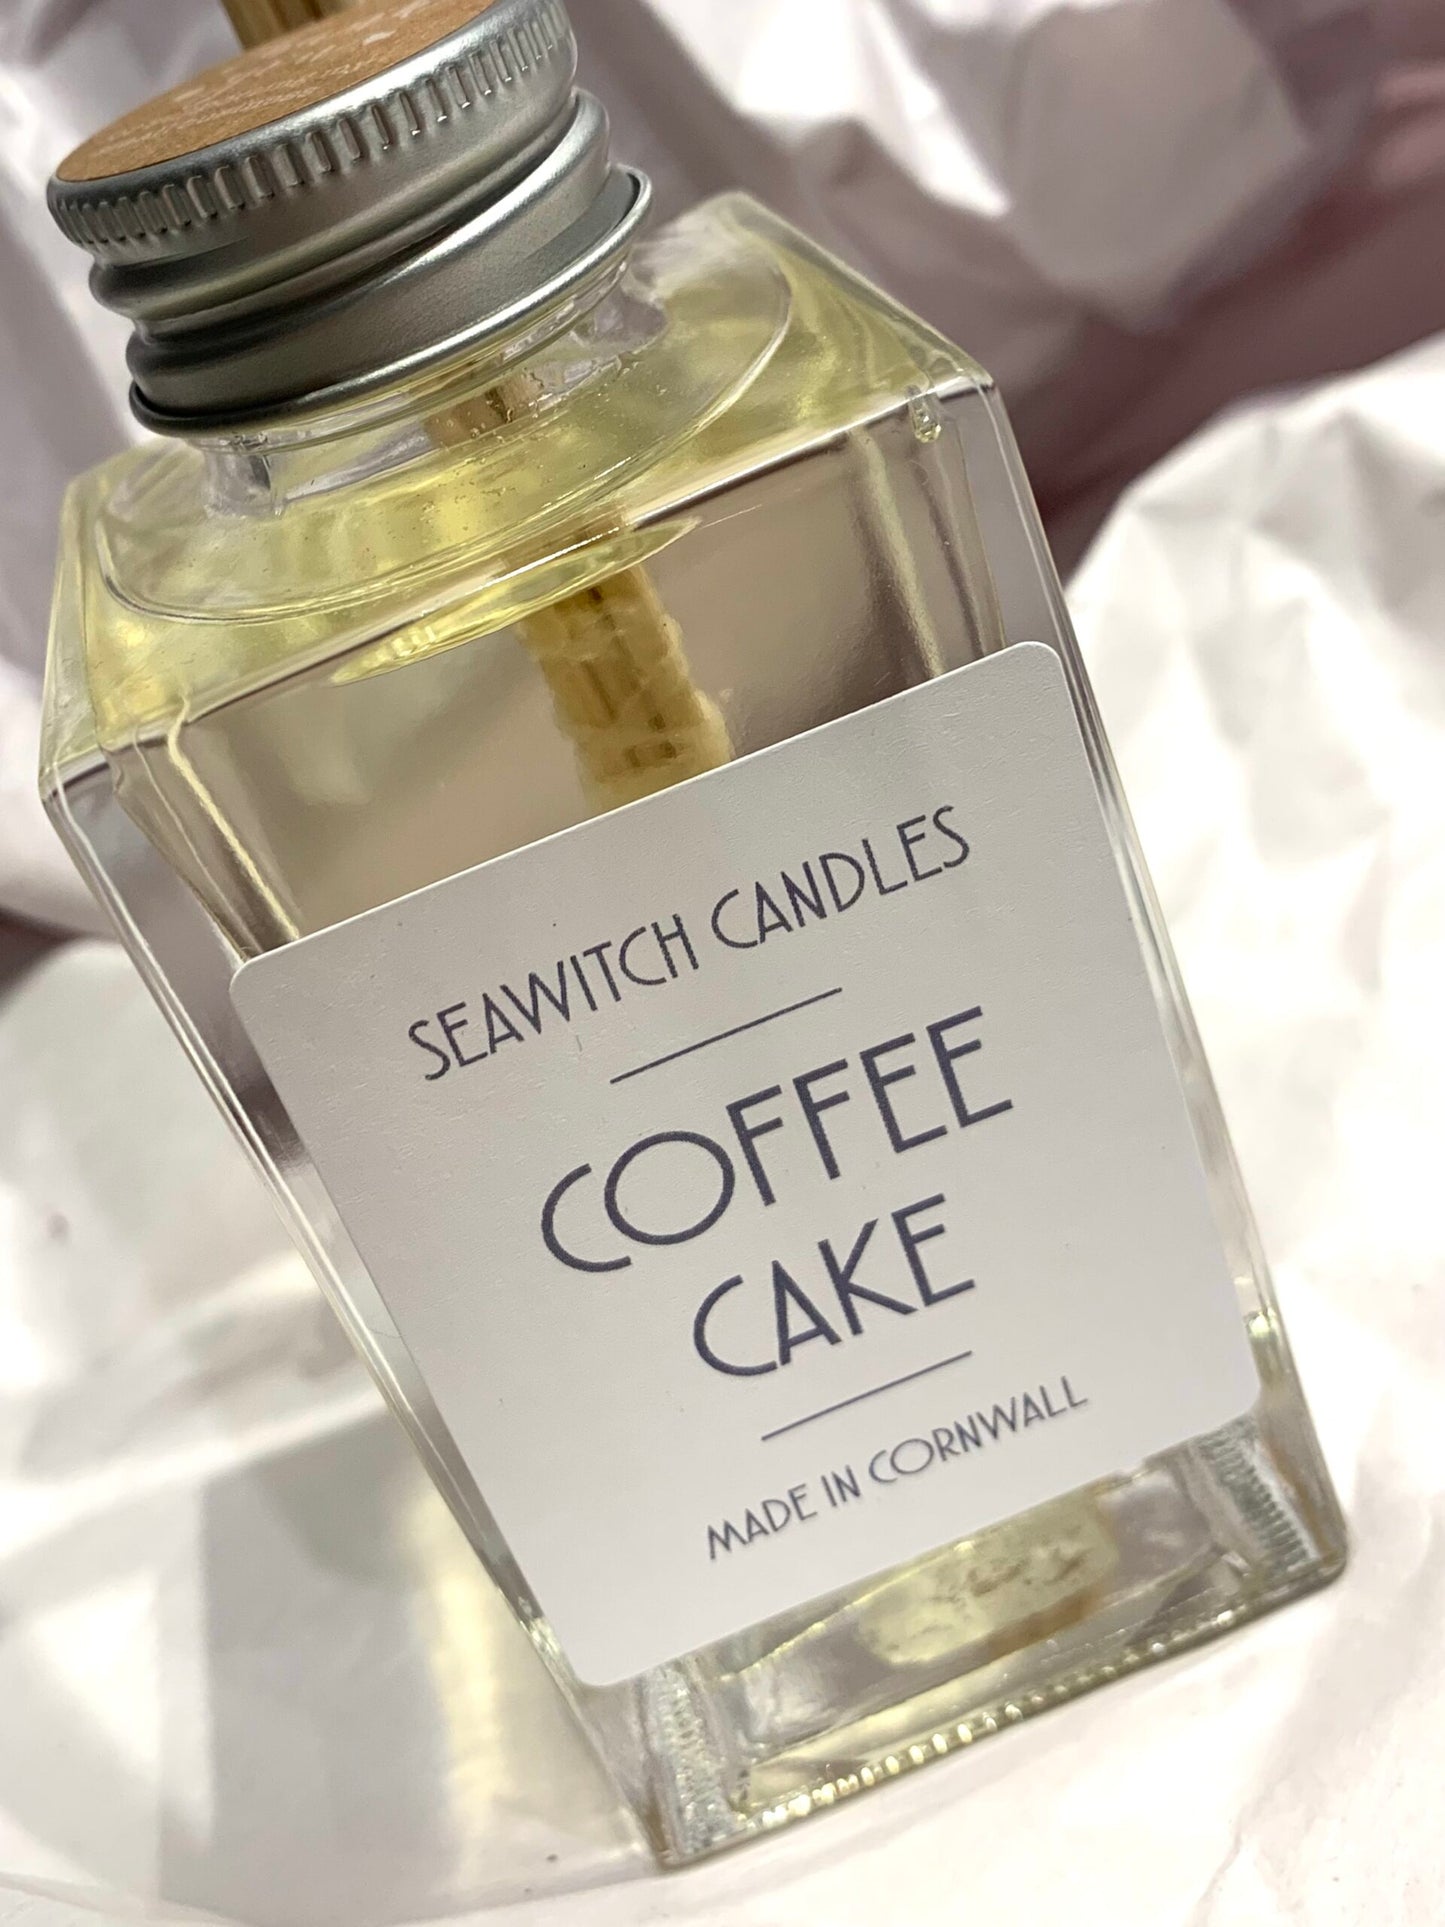 Coffee Cake Scented Diffuser - Handmade in Cornwall